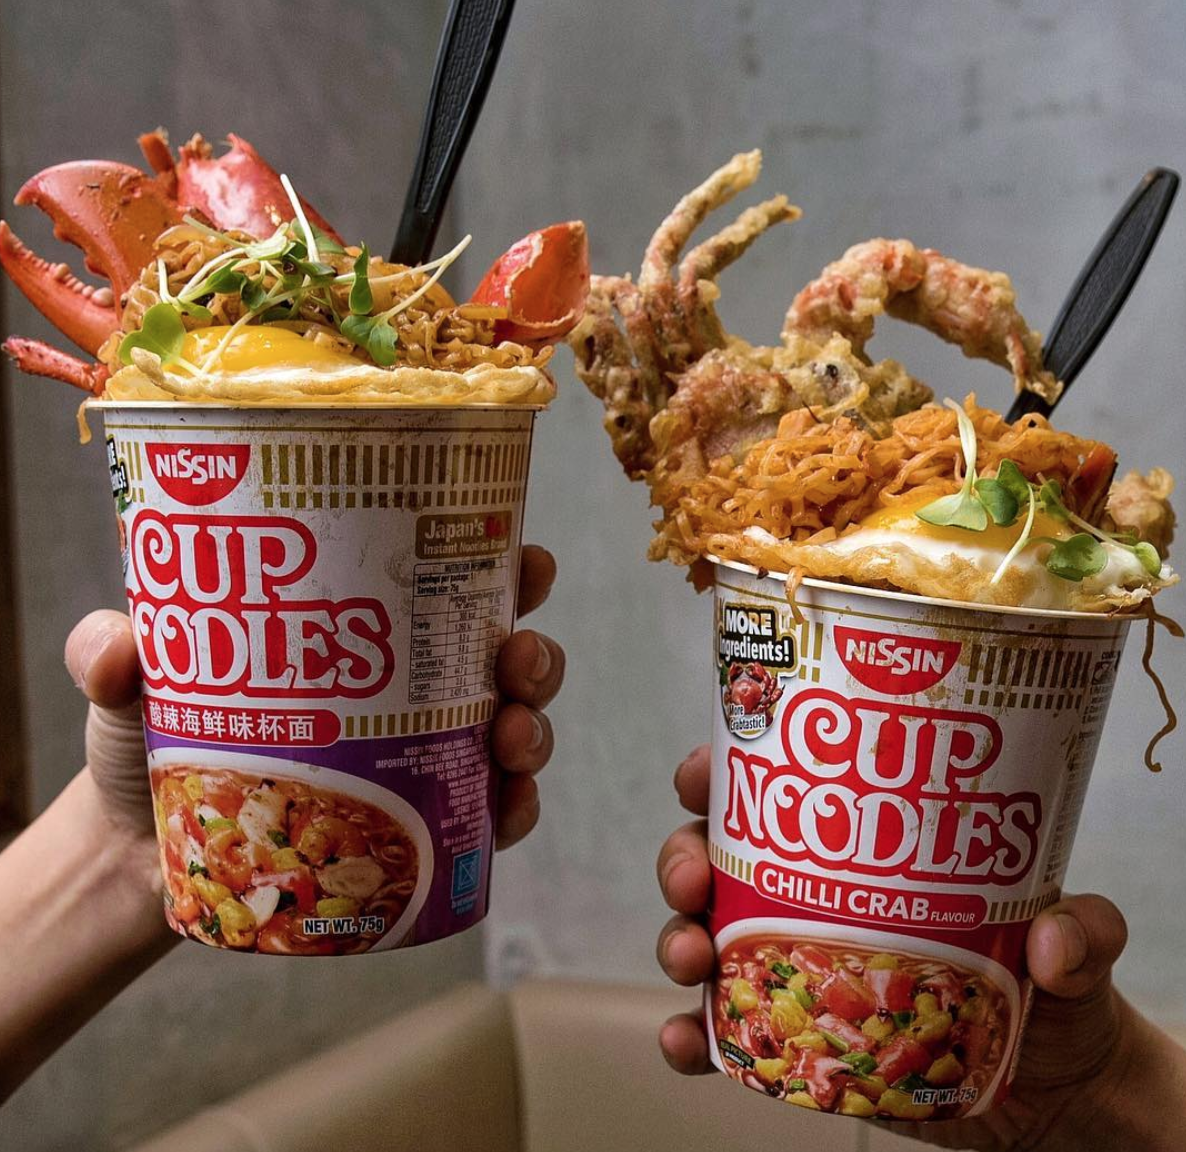 Wow, This Japanese Restaurant In Singapore Sells Cup Noodles With